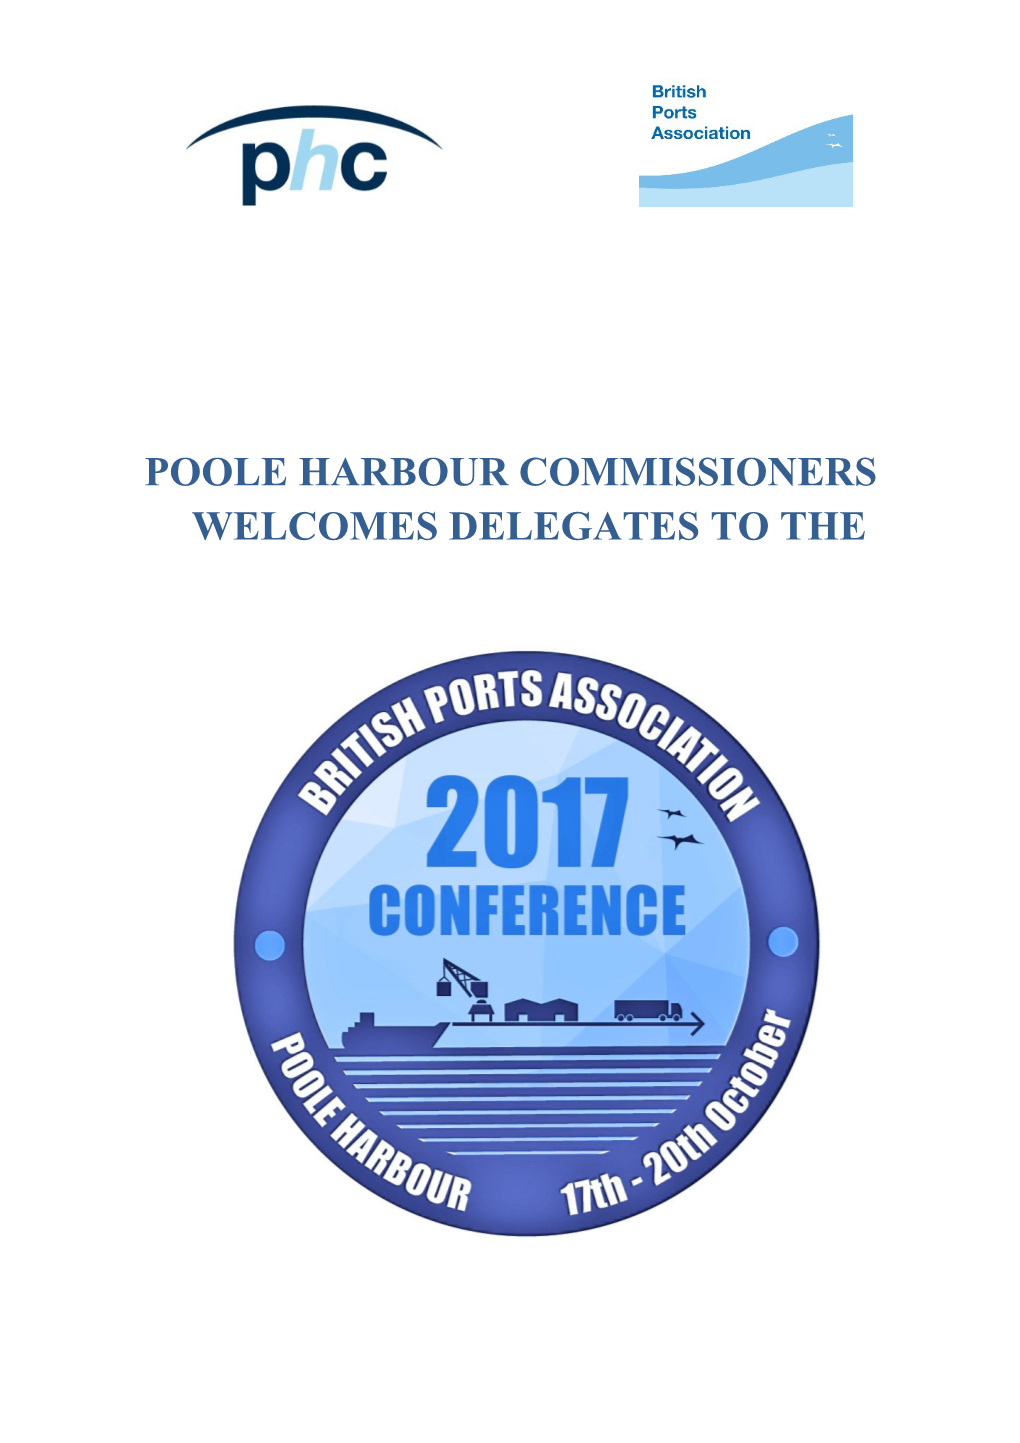 Poole Harbour Commissioners Welcomes Delegates to The